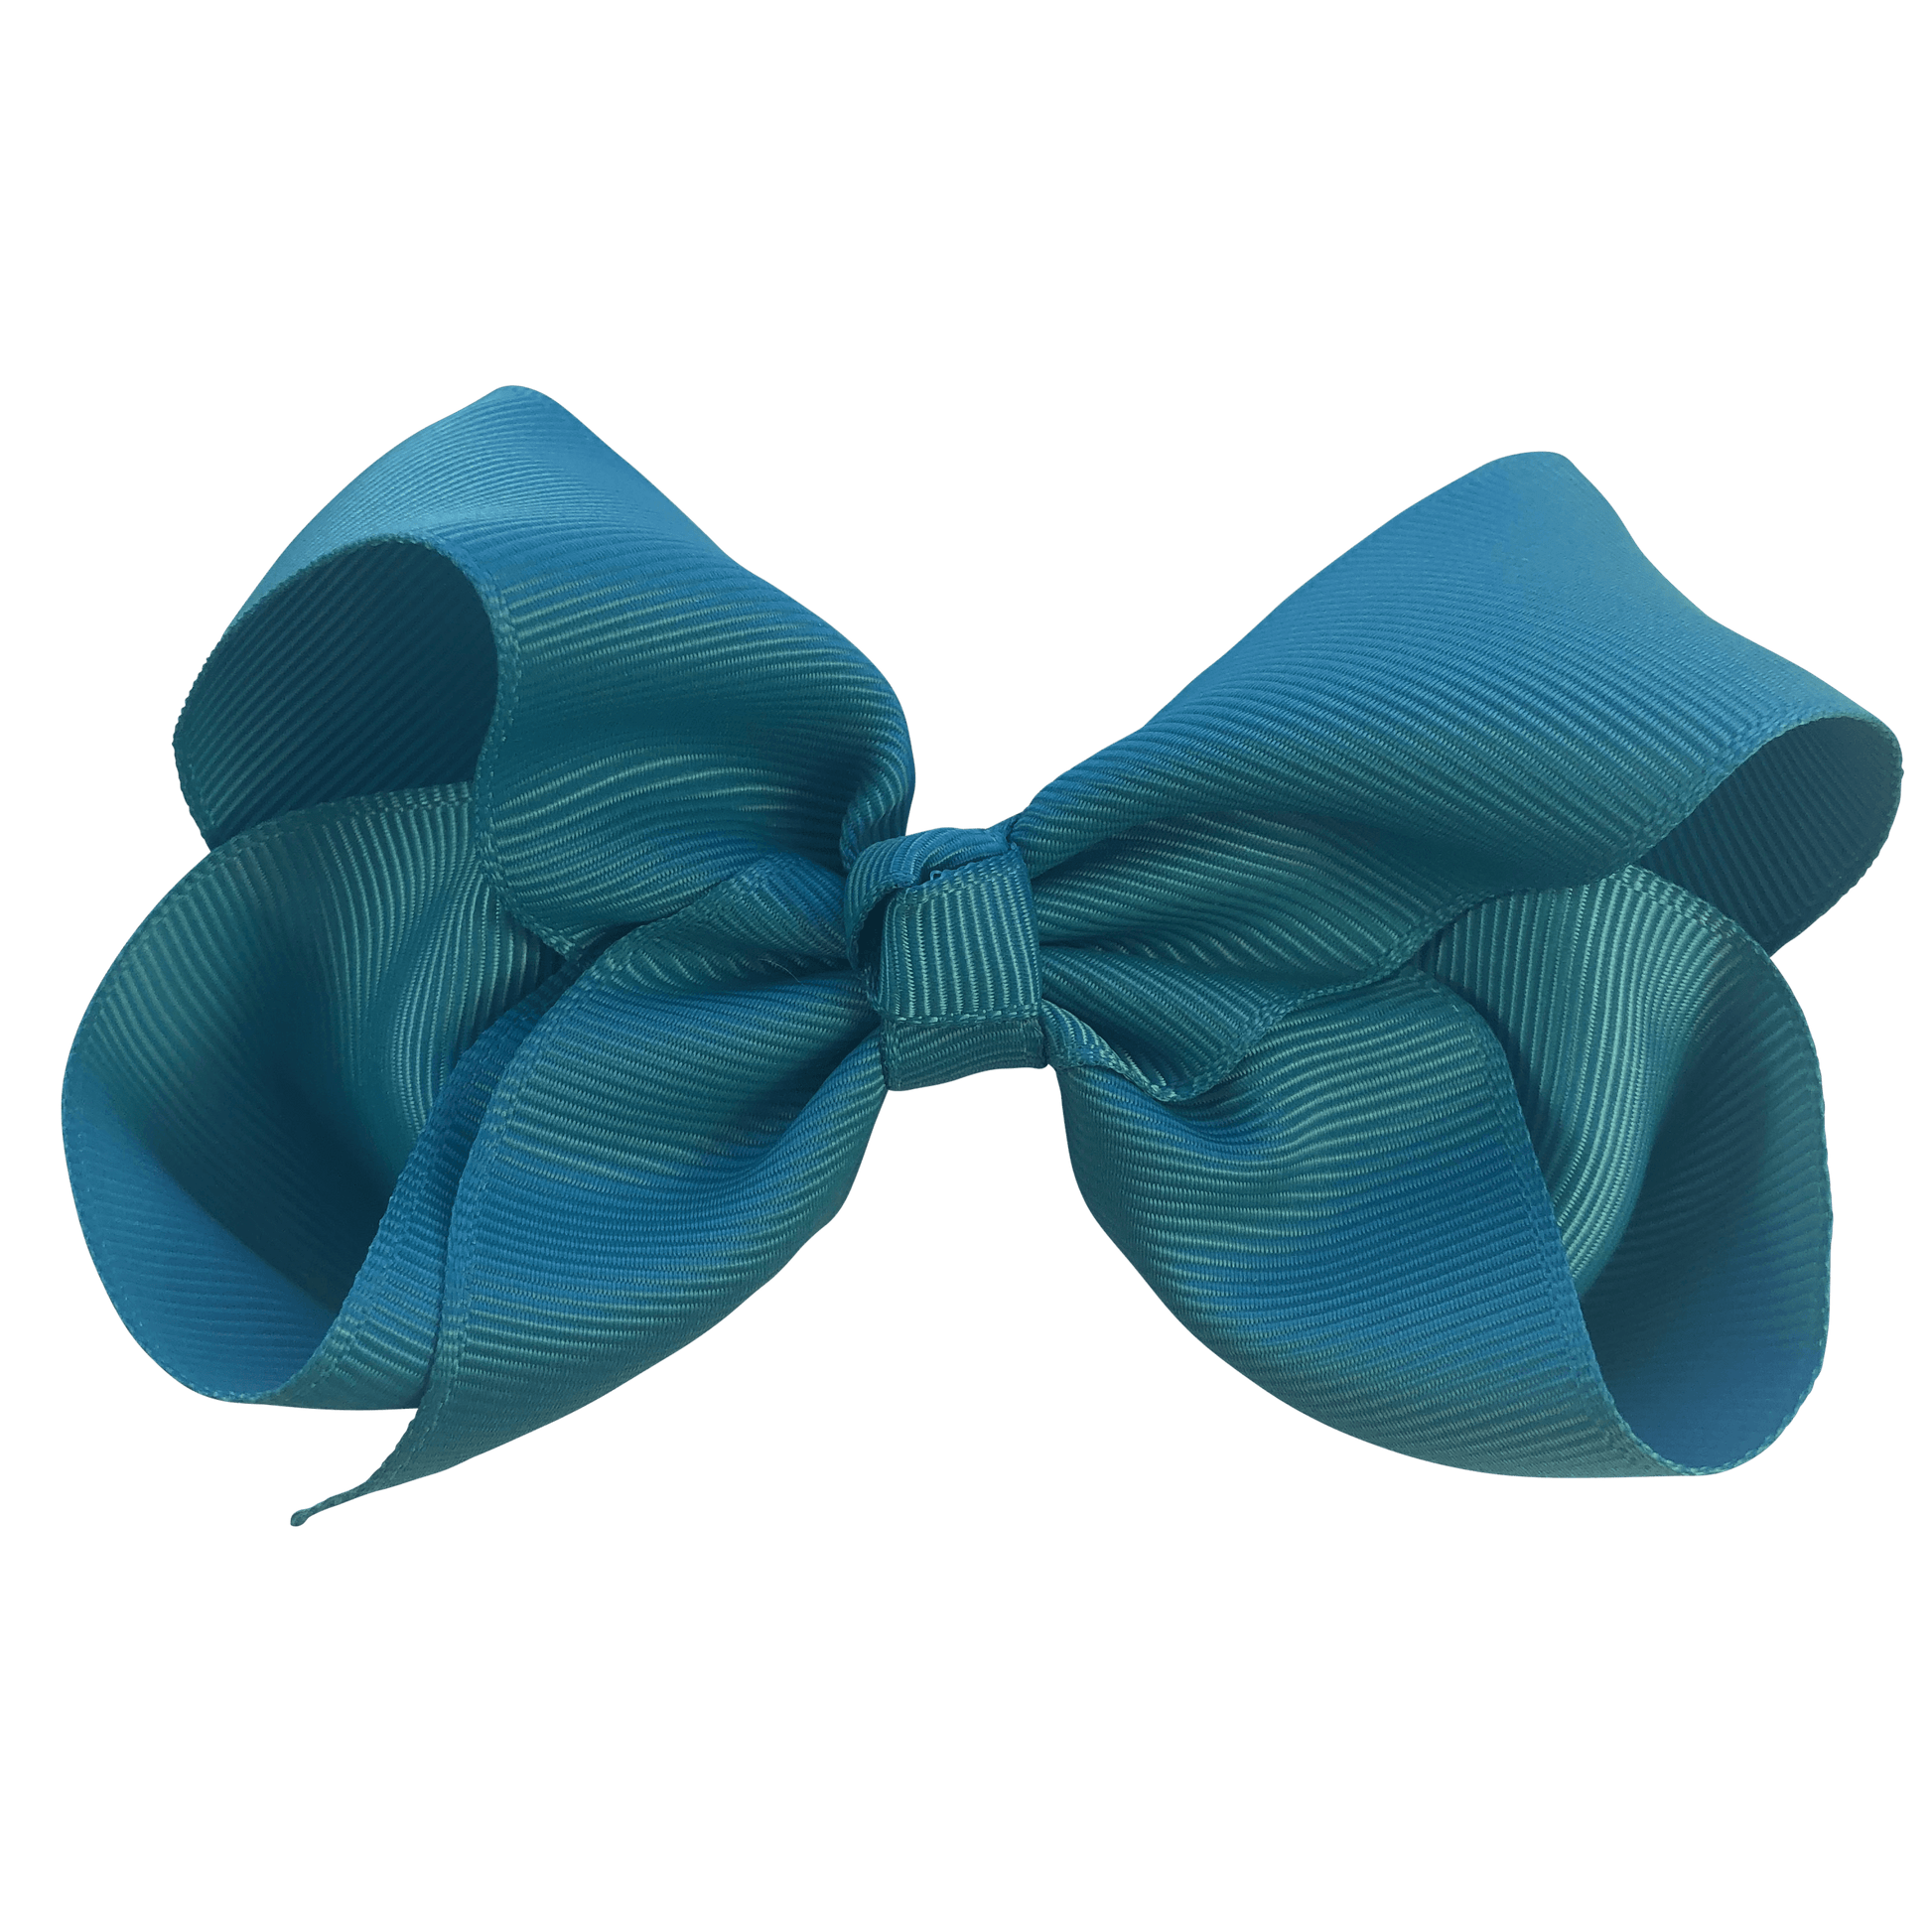 Teal Hair Accessories - Assorted Hair Accessories - School Uniform Hair Accessories - Ponytails and Fairytales